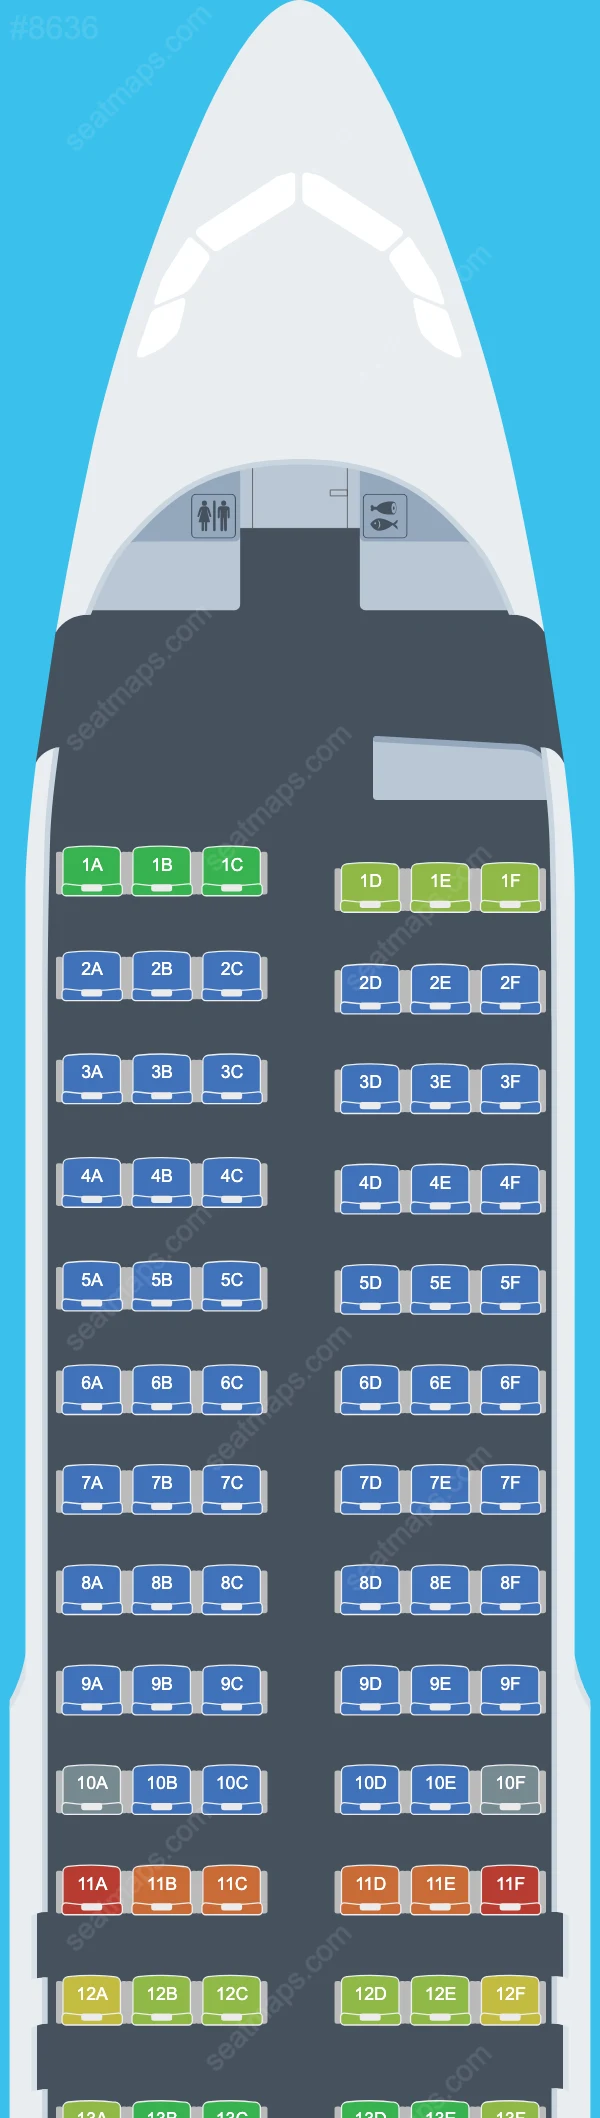 Network Aviation Airbus A320 Seat Maps A320-200 V.1